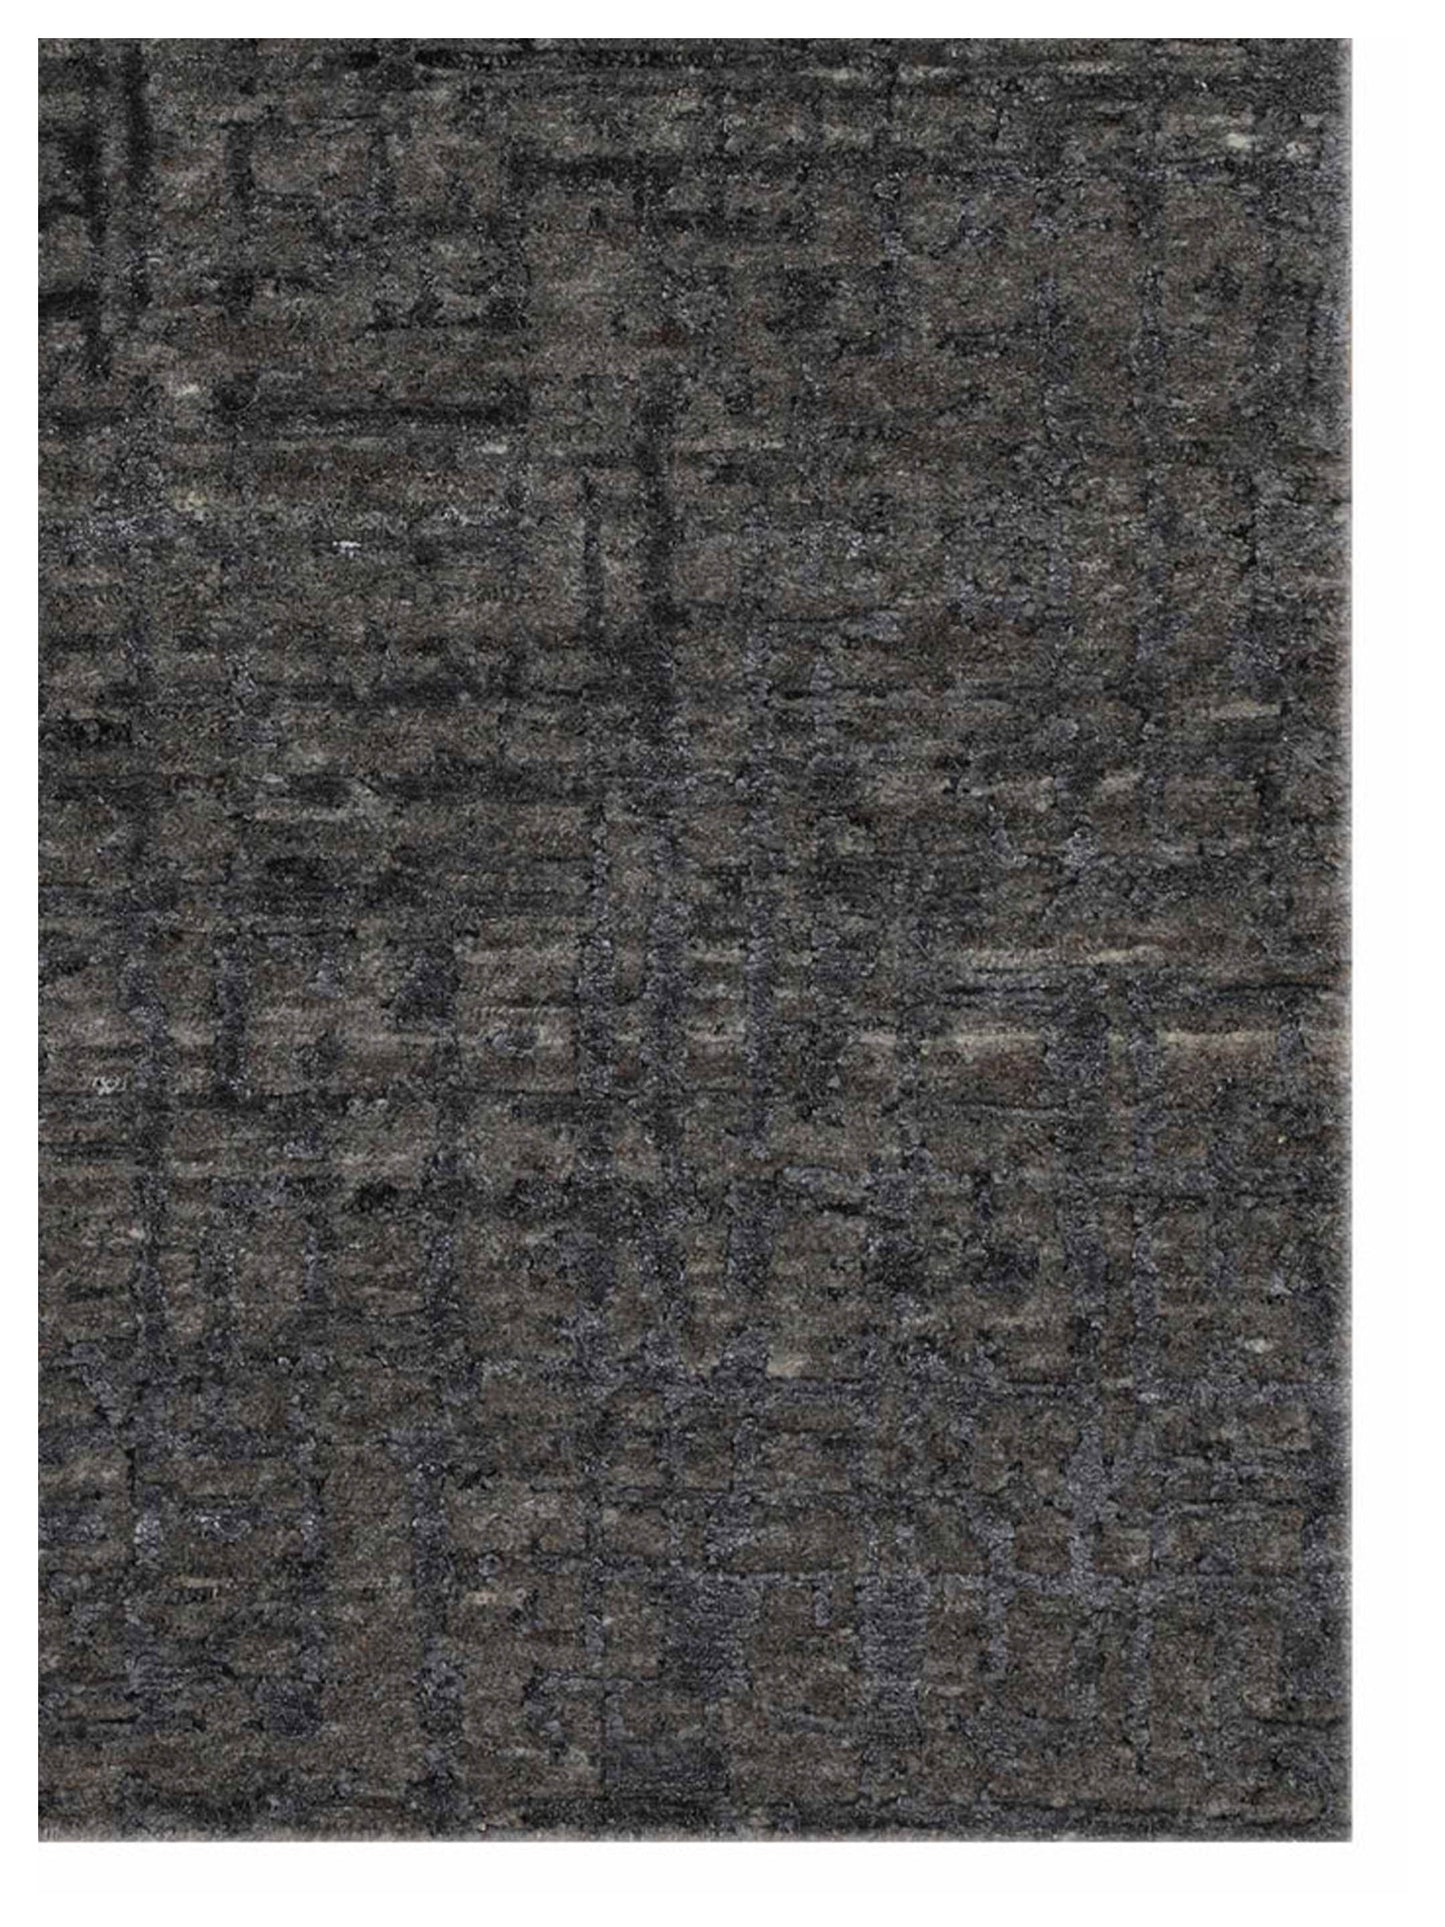 Artisan Mary  Stone  Contemporary Knotted Rug